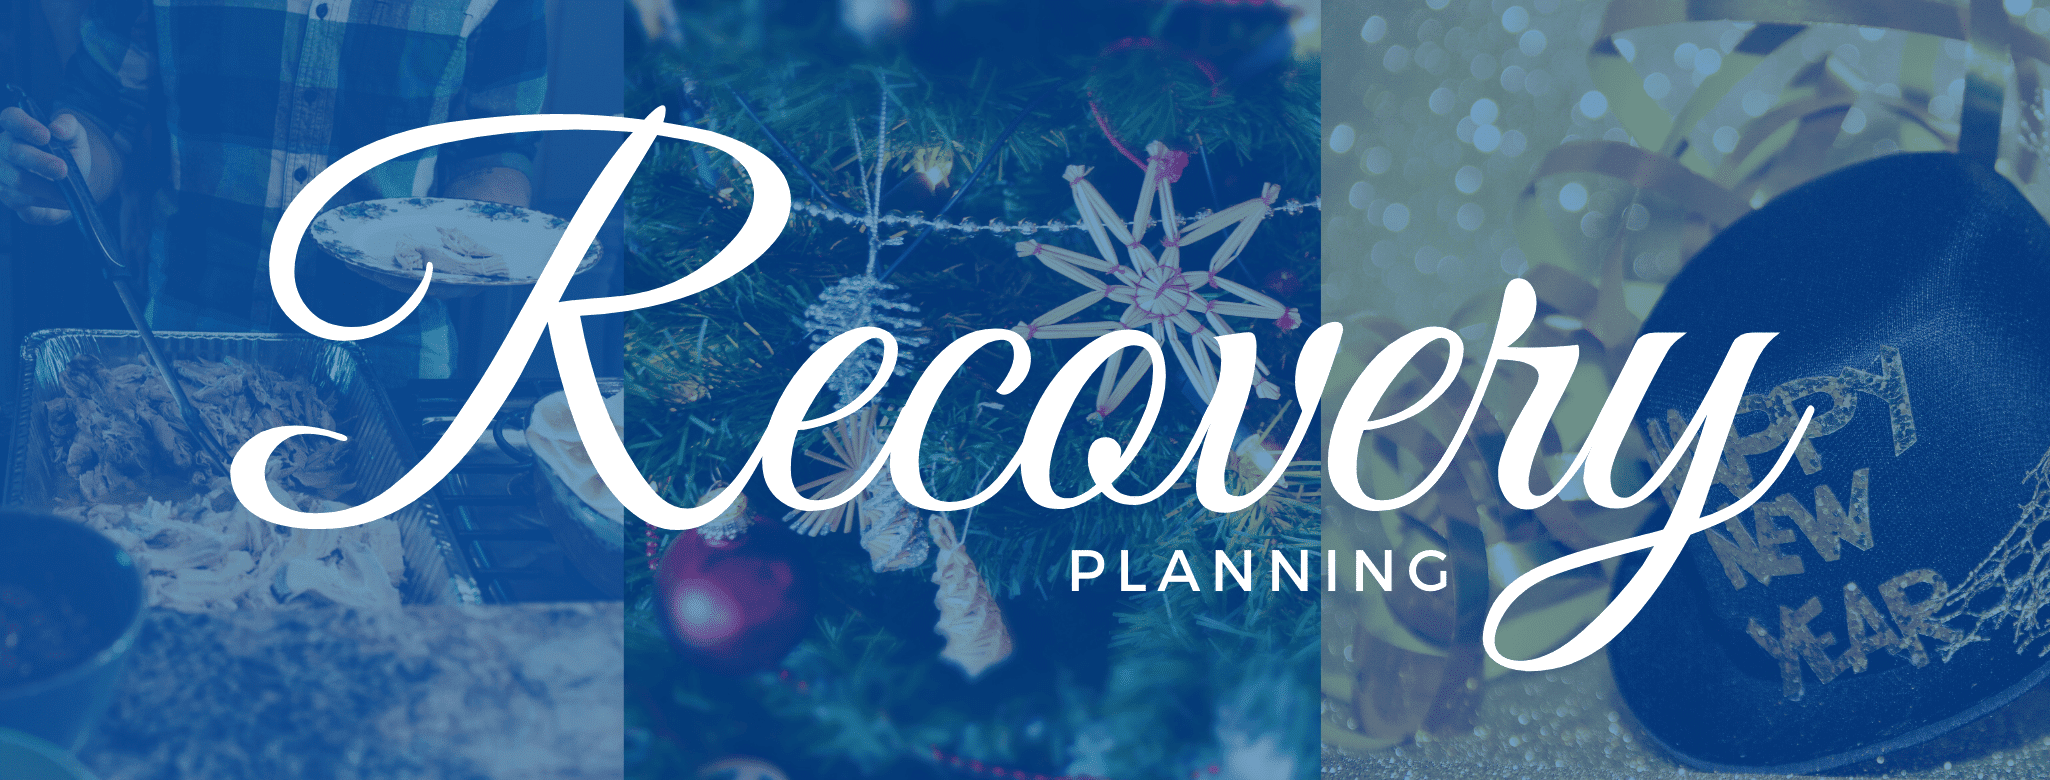 recovery planning for the holiday season